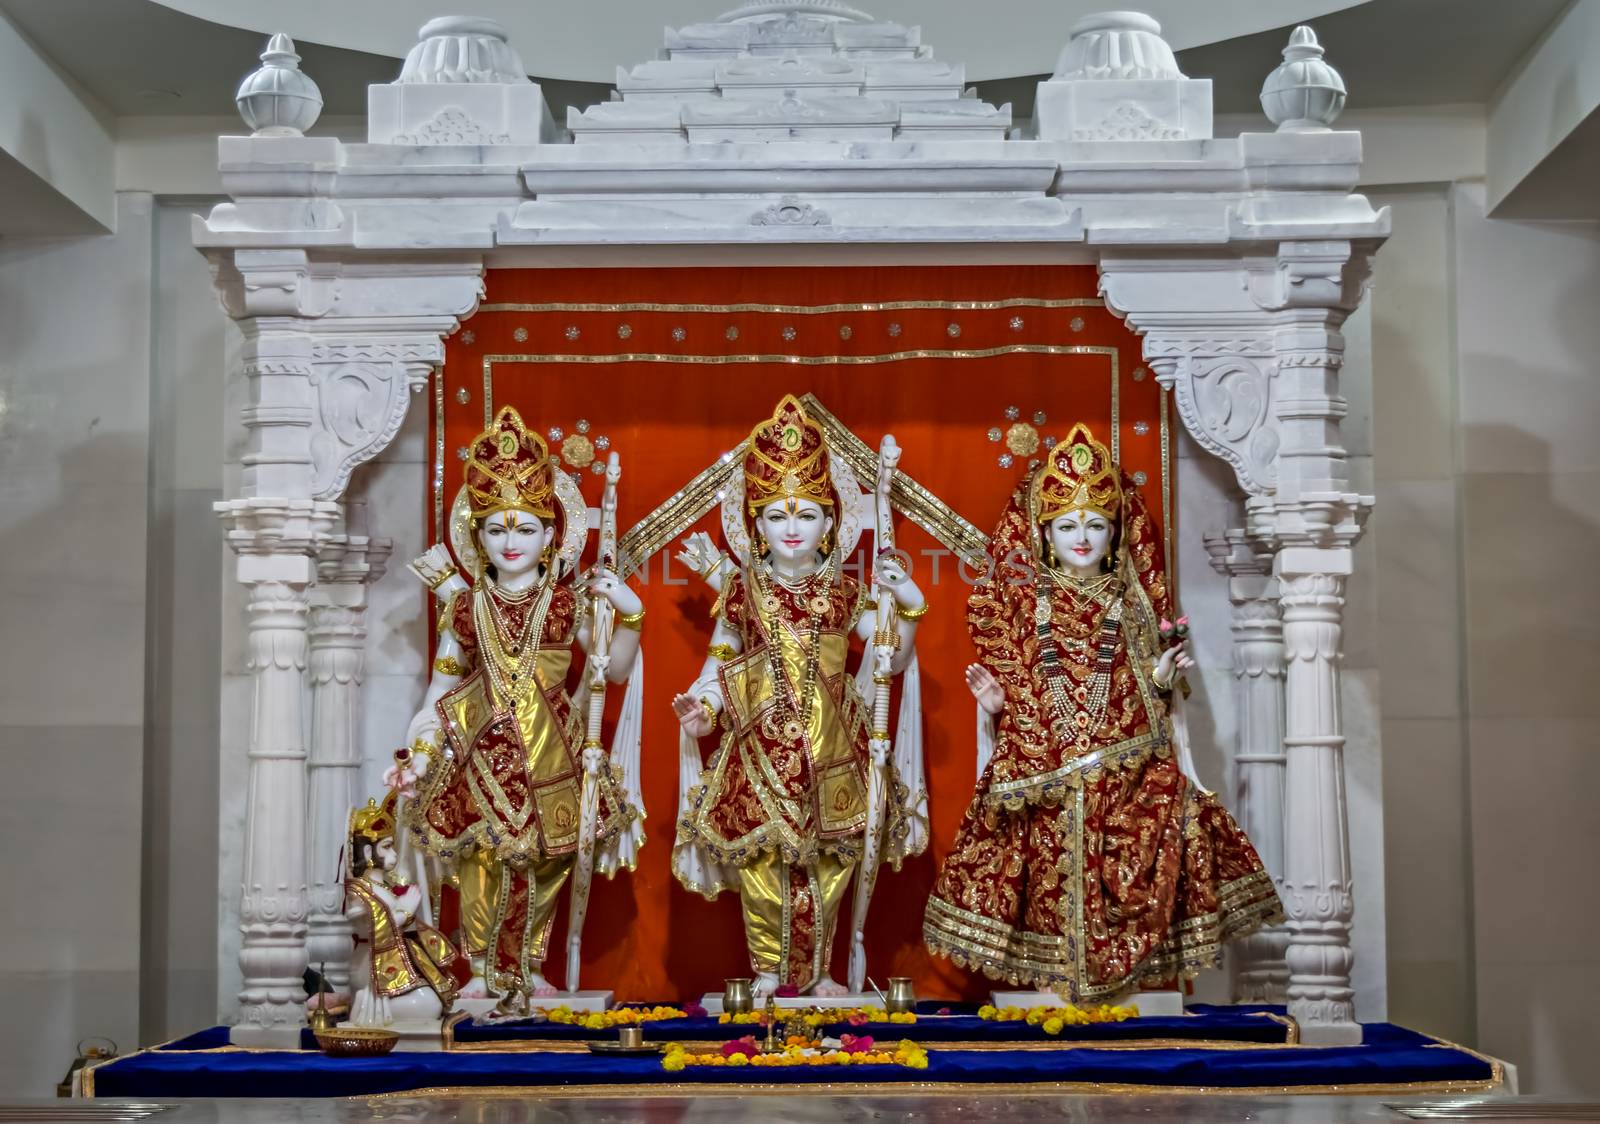 Decorated idols of Hindu Gods Ram, Lakshman & Godless Sita together in a temple at Somnath, Gujrat, India.